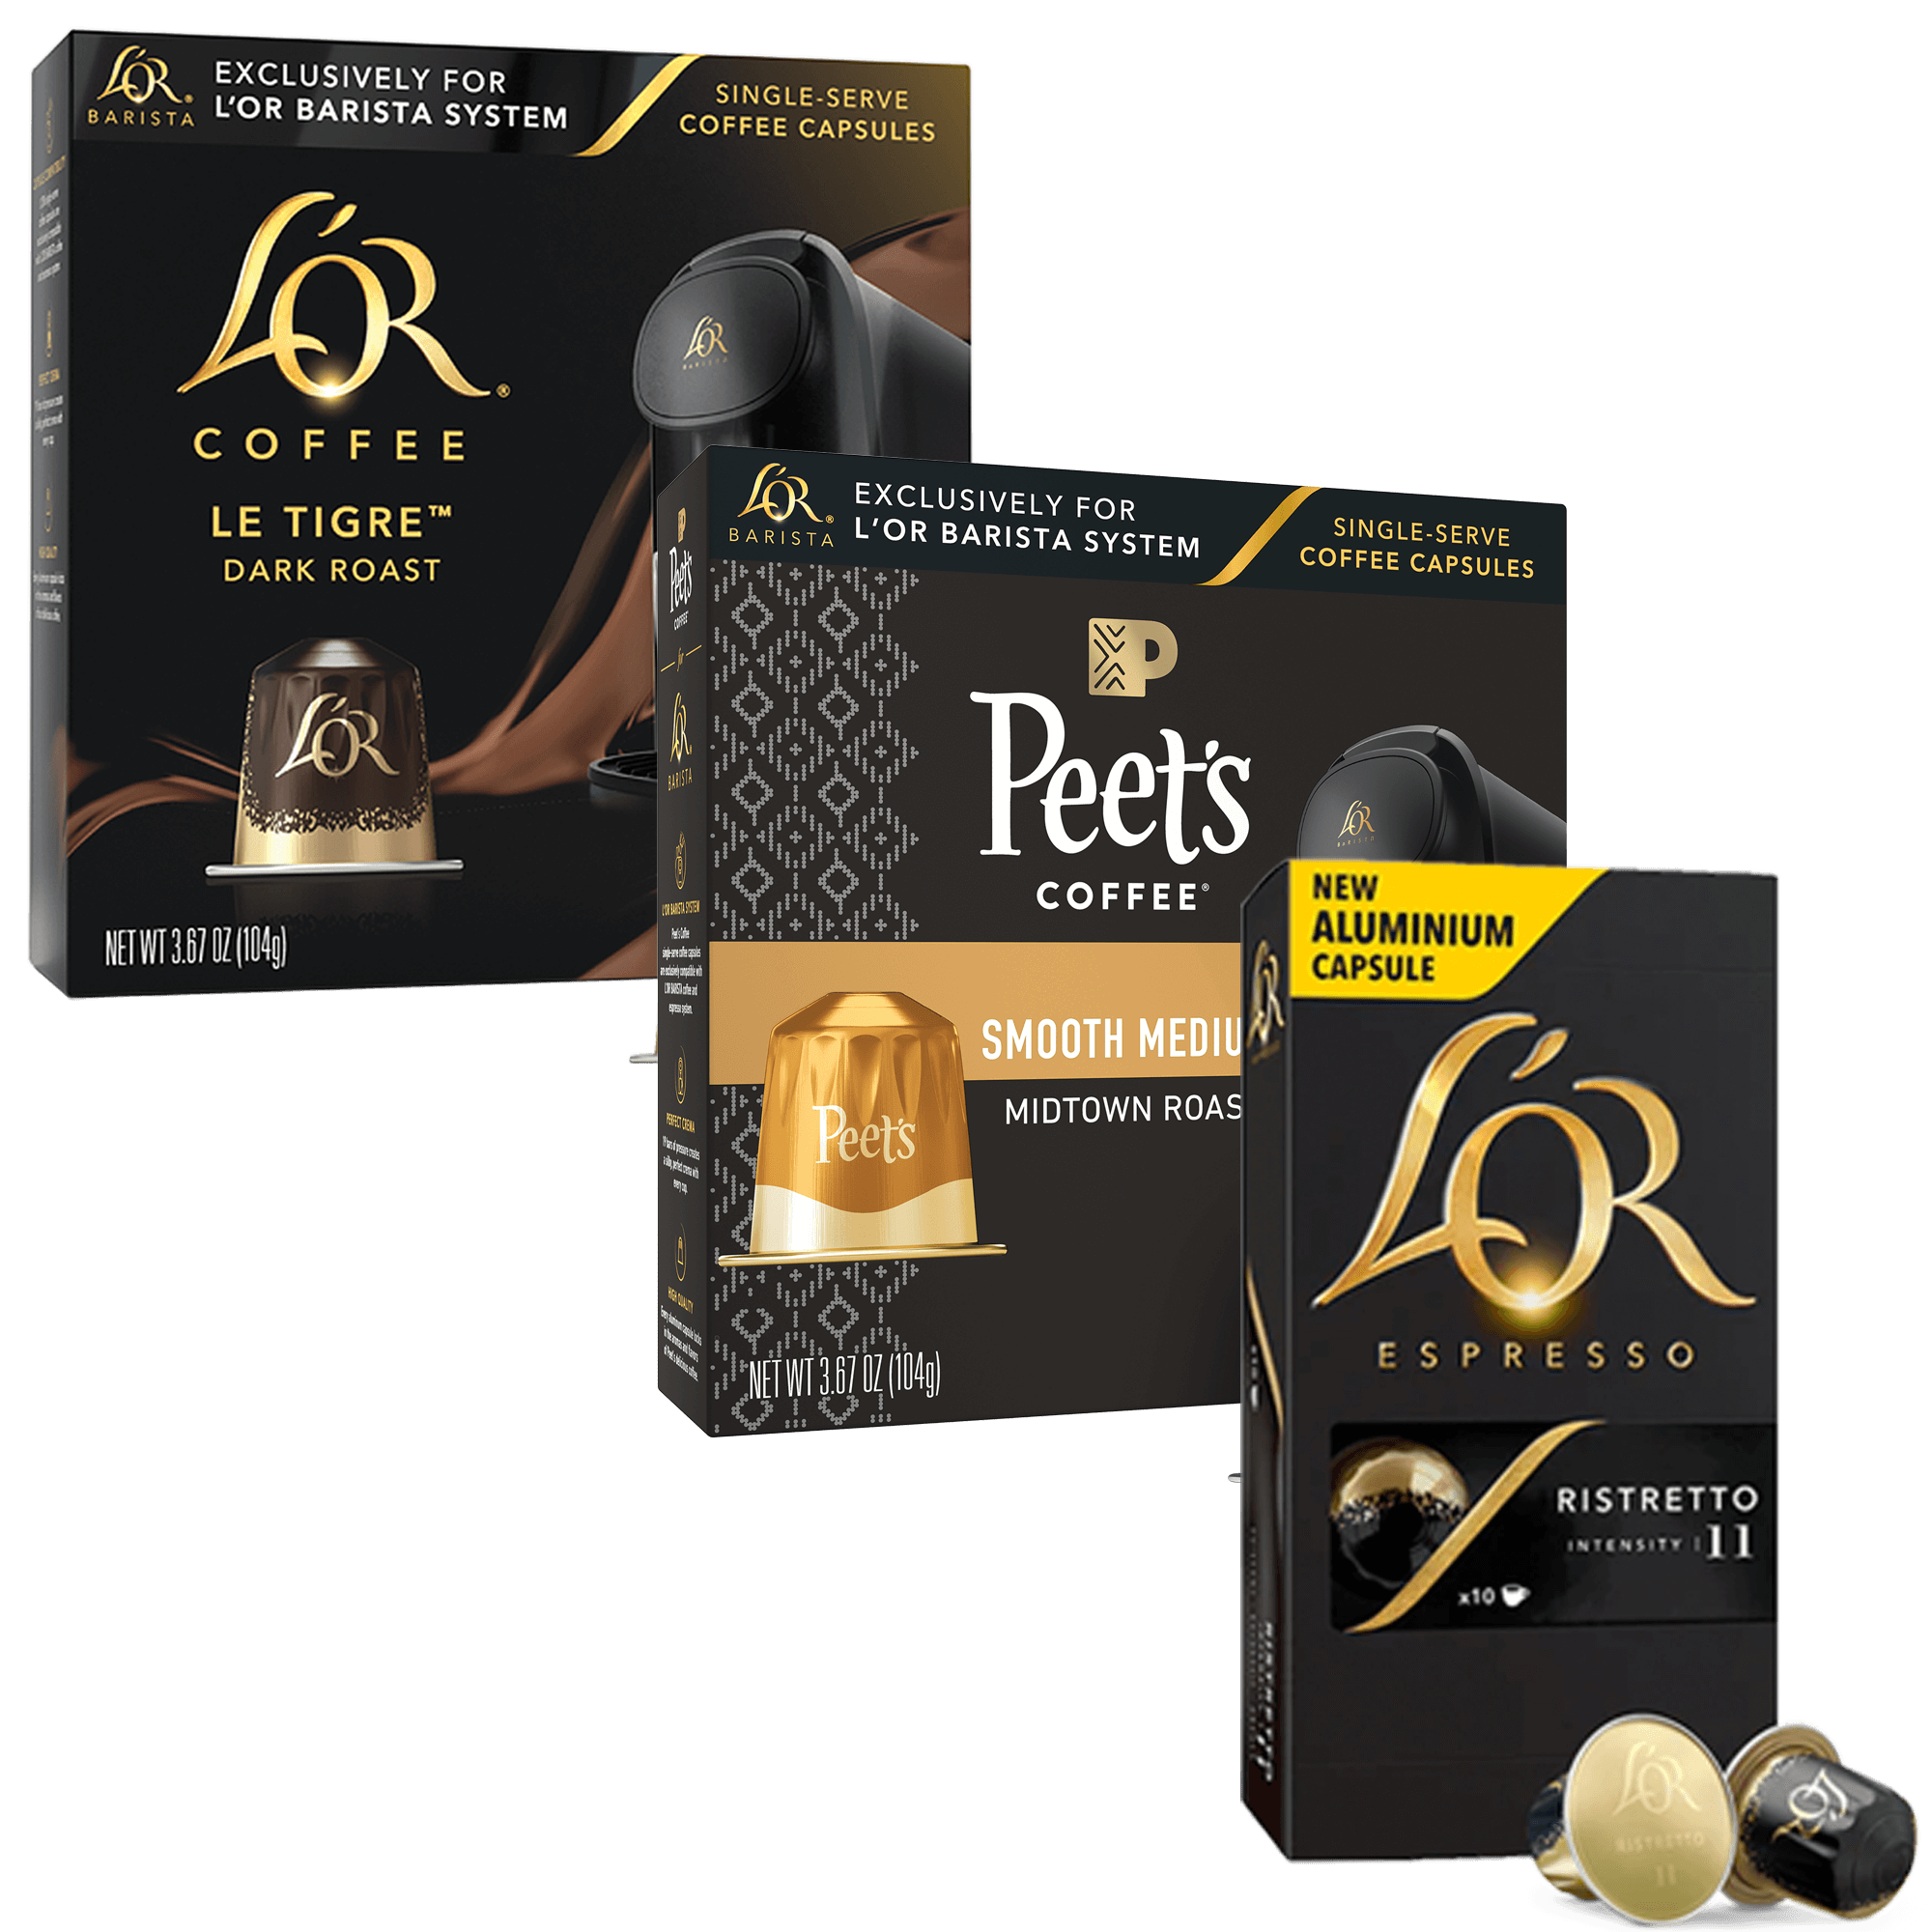 L'OR Espresso and Coffee Pods Including Peet's - 30 Count (2 Sizes), Single  Cup Aluminum Coffee Capsules Compatible with the L'OR Barista Coffee and